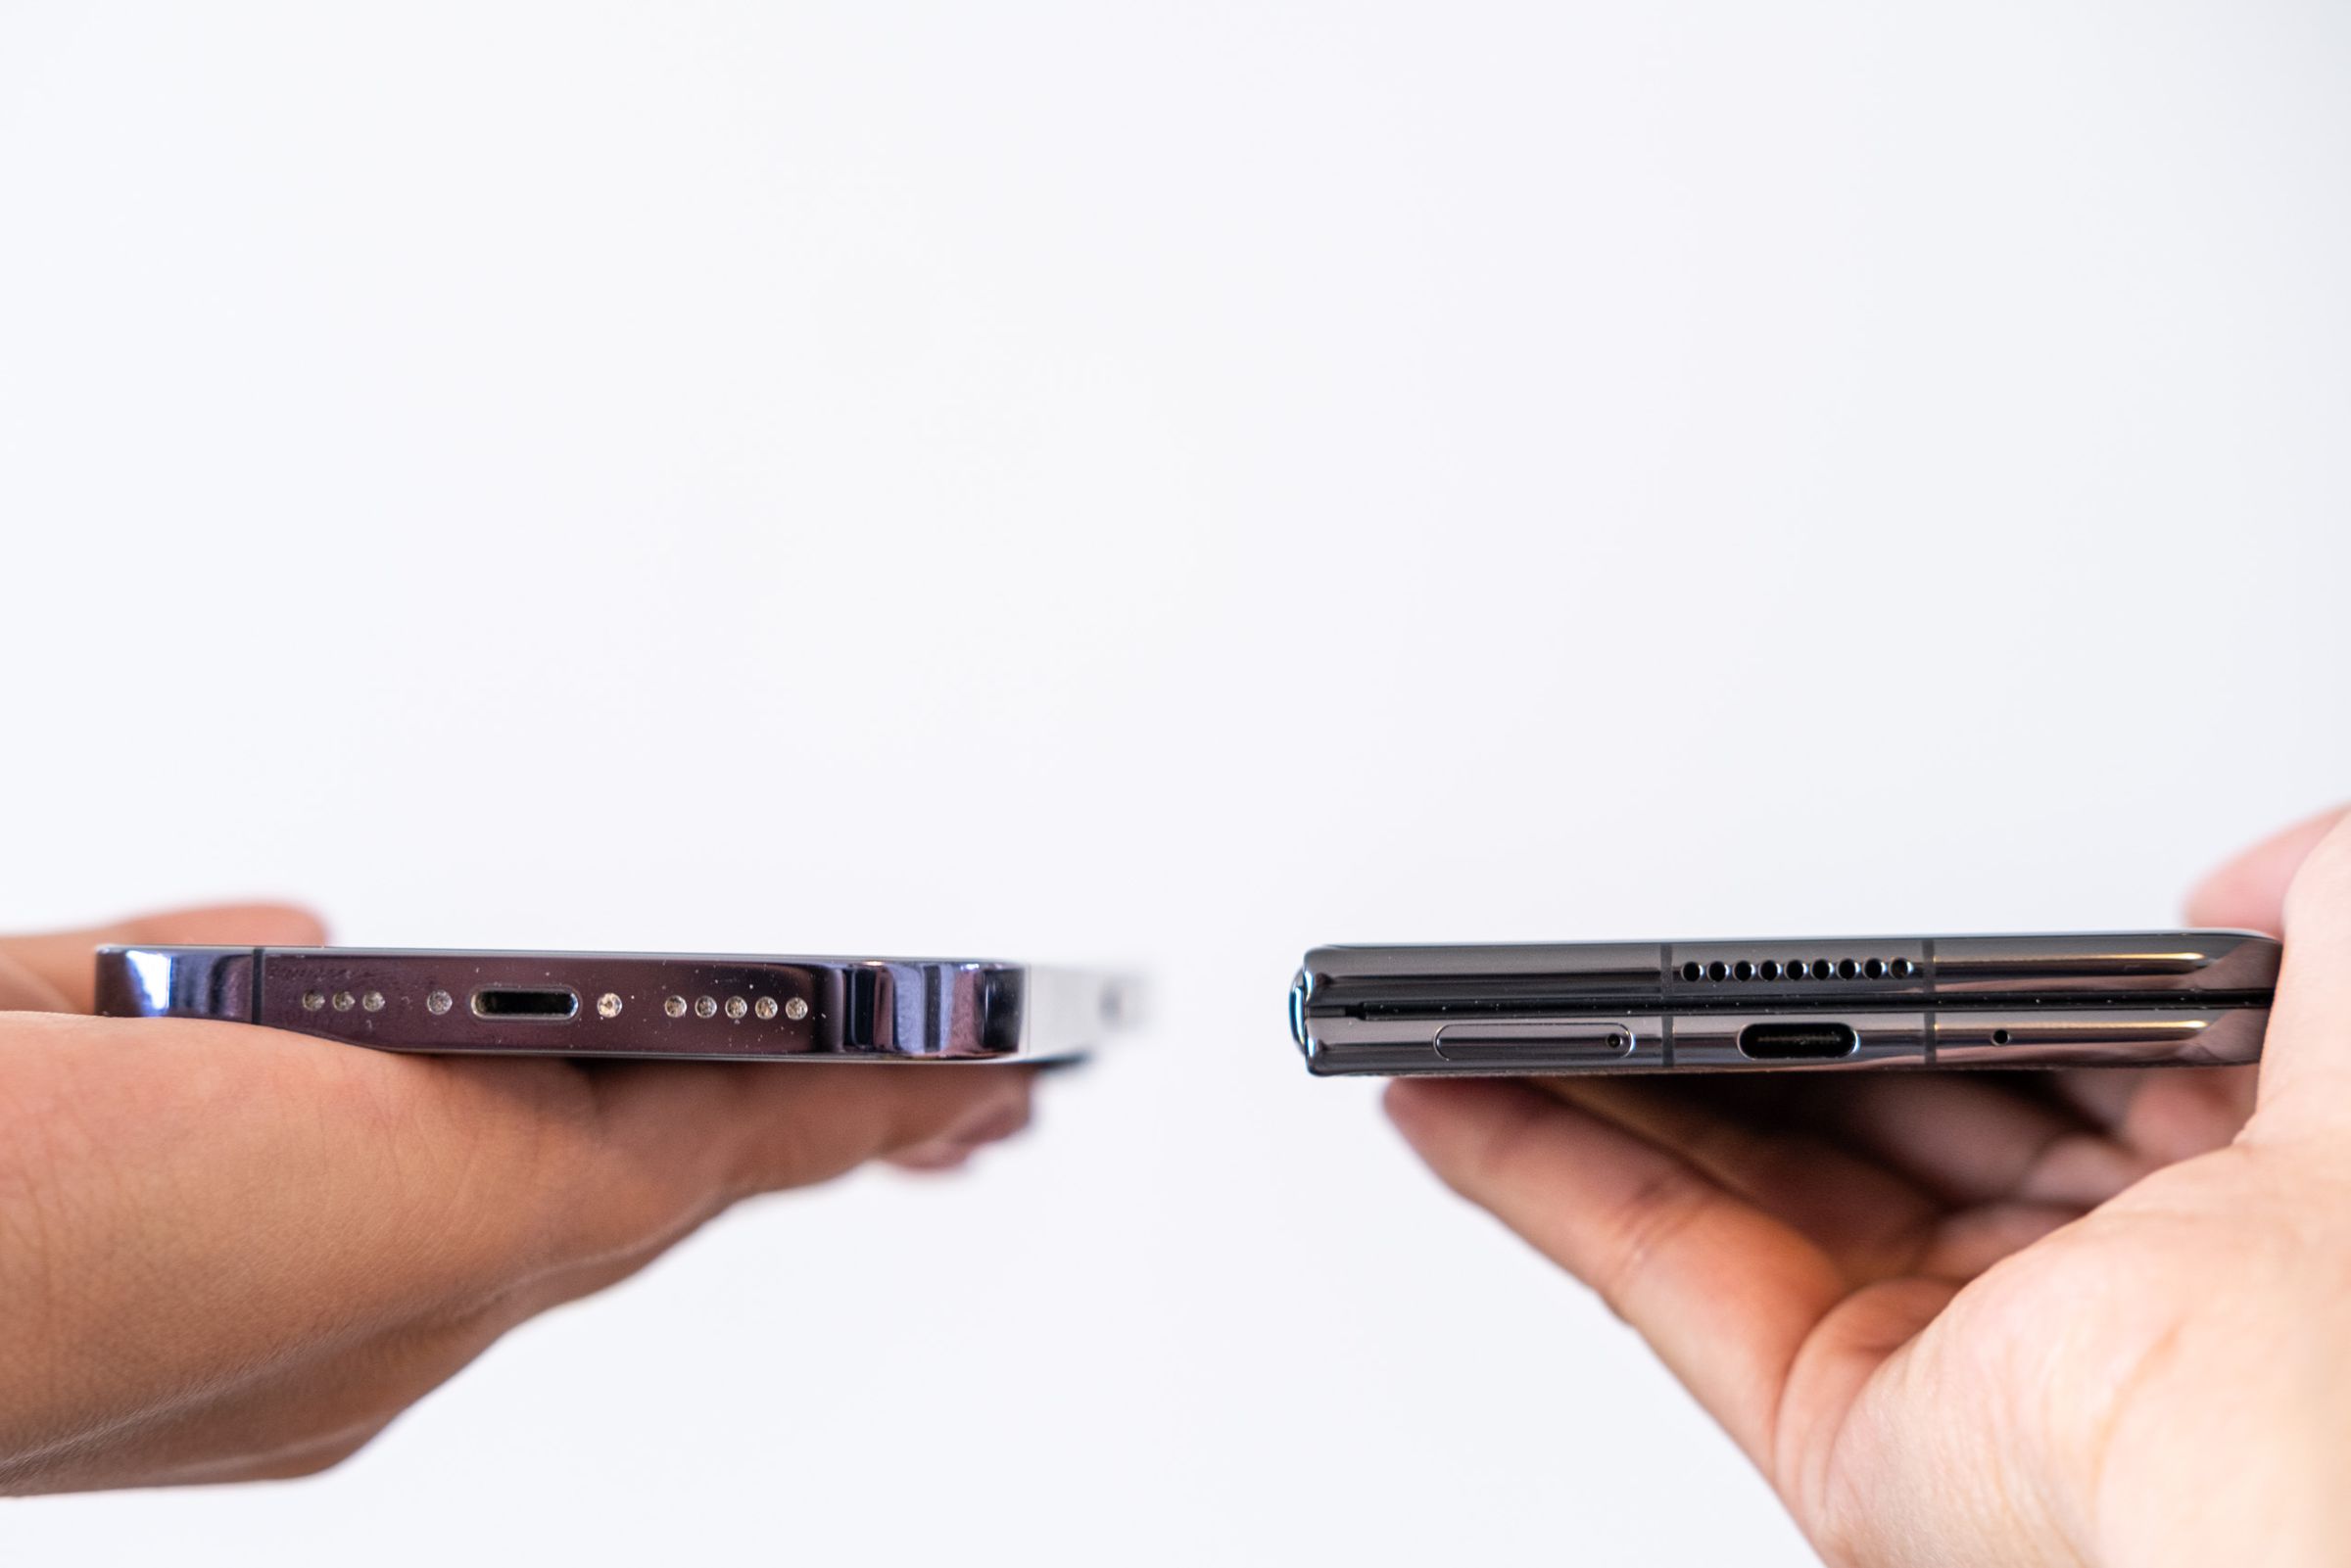 iPhone 14 Pro (left) next to Honor Magic V2 (right)